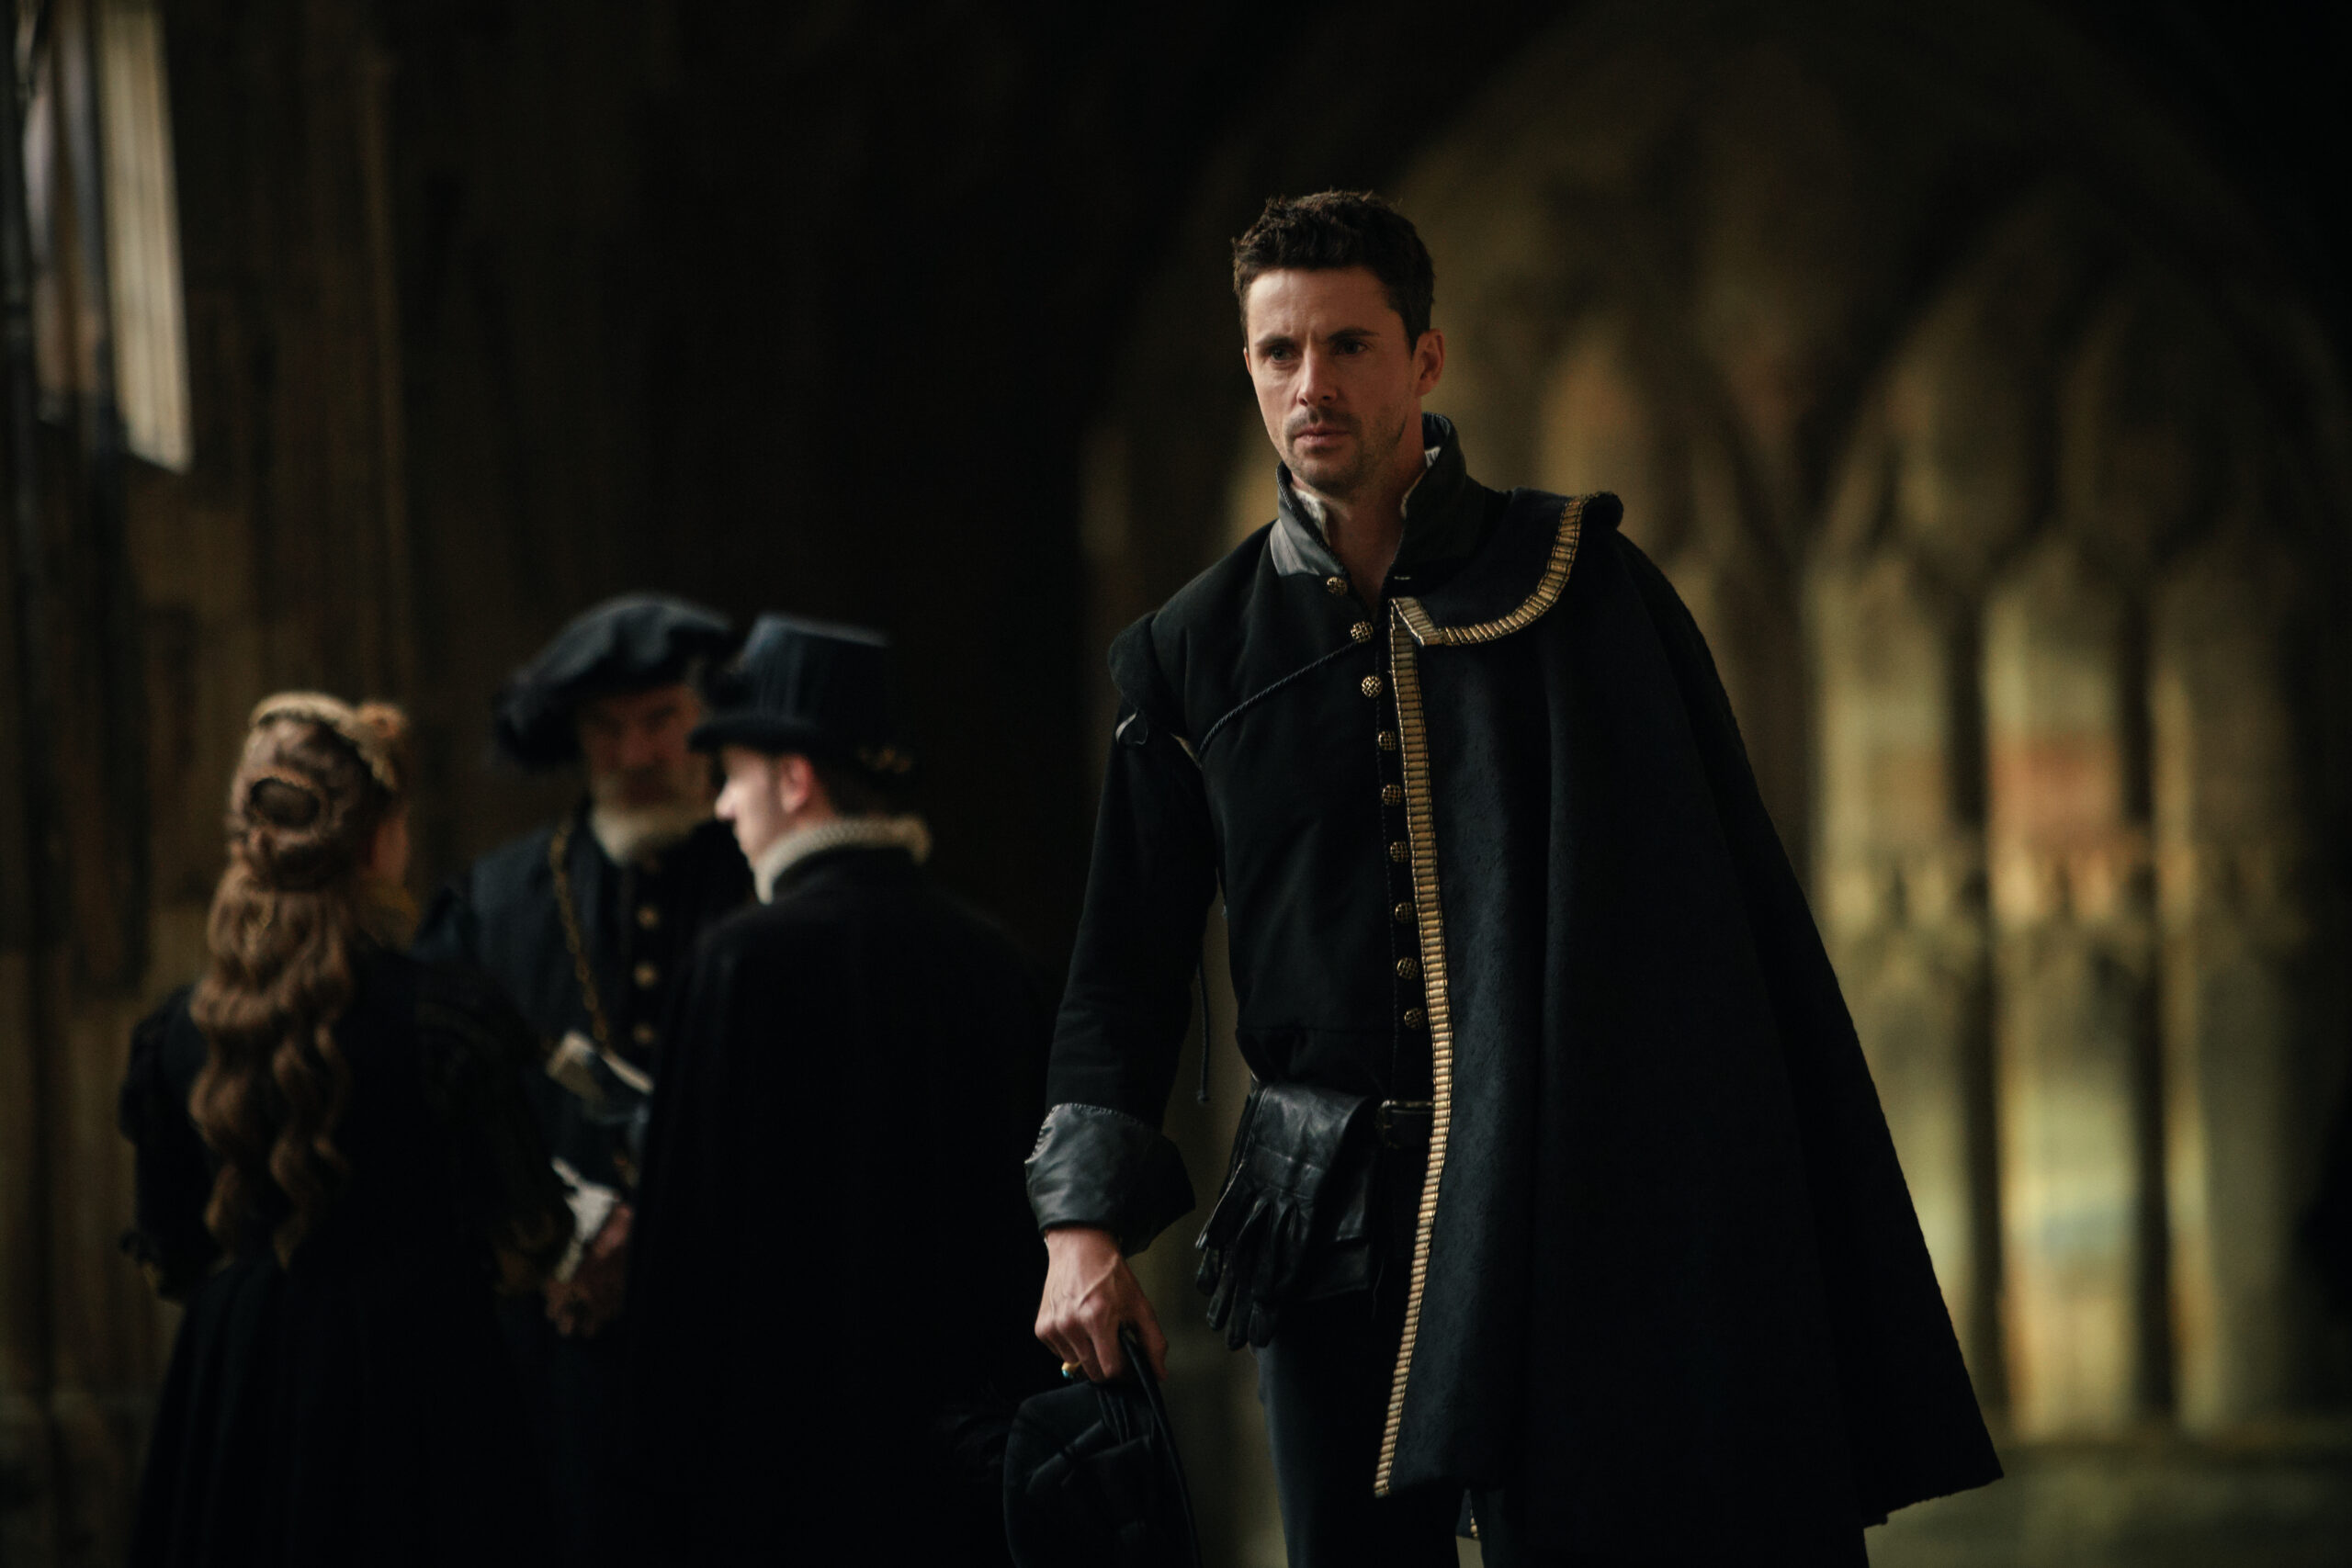 Matthew Goode as Matthew Clairmont in A Discovery of Witches